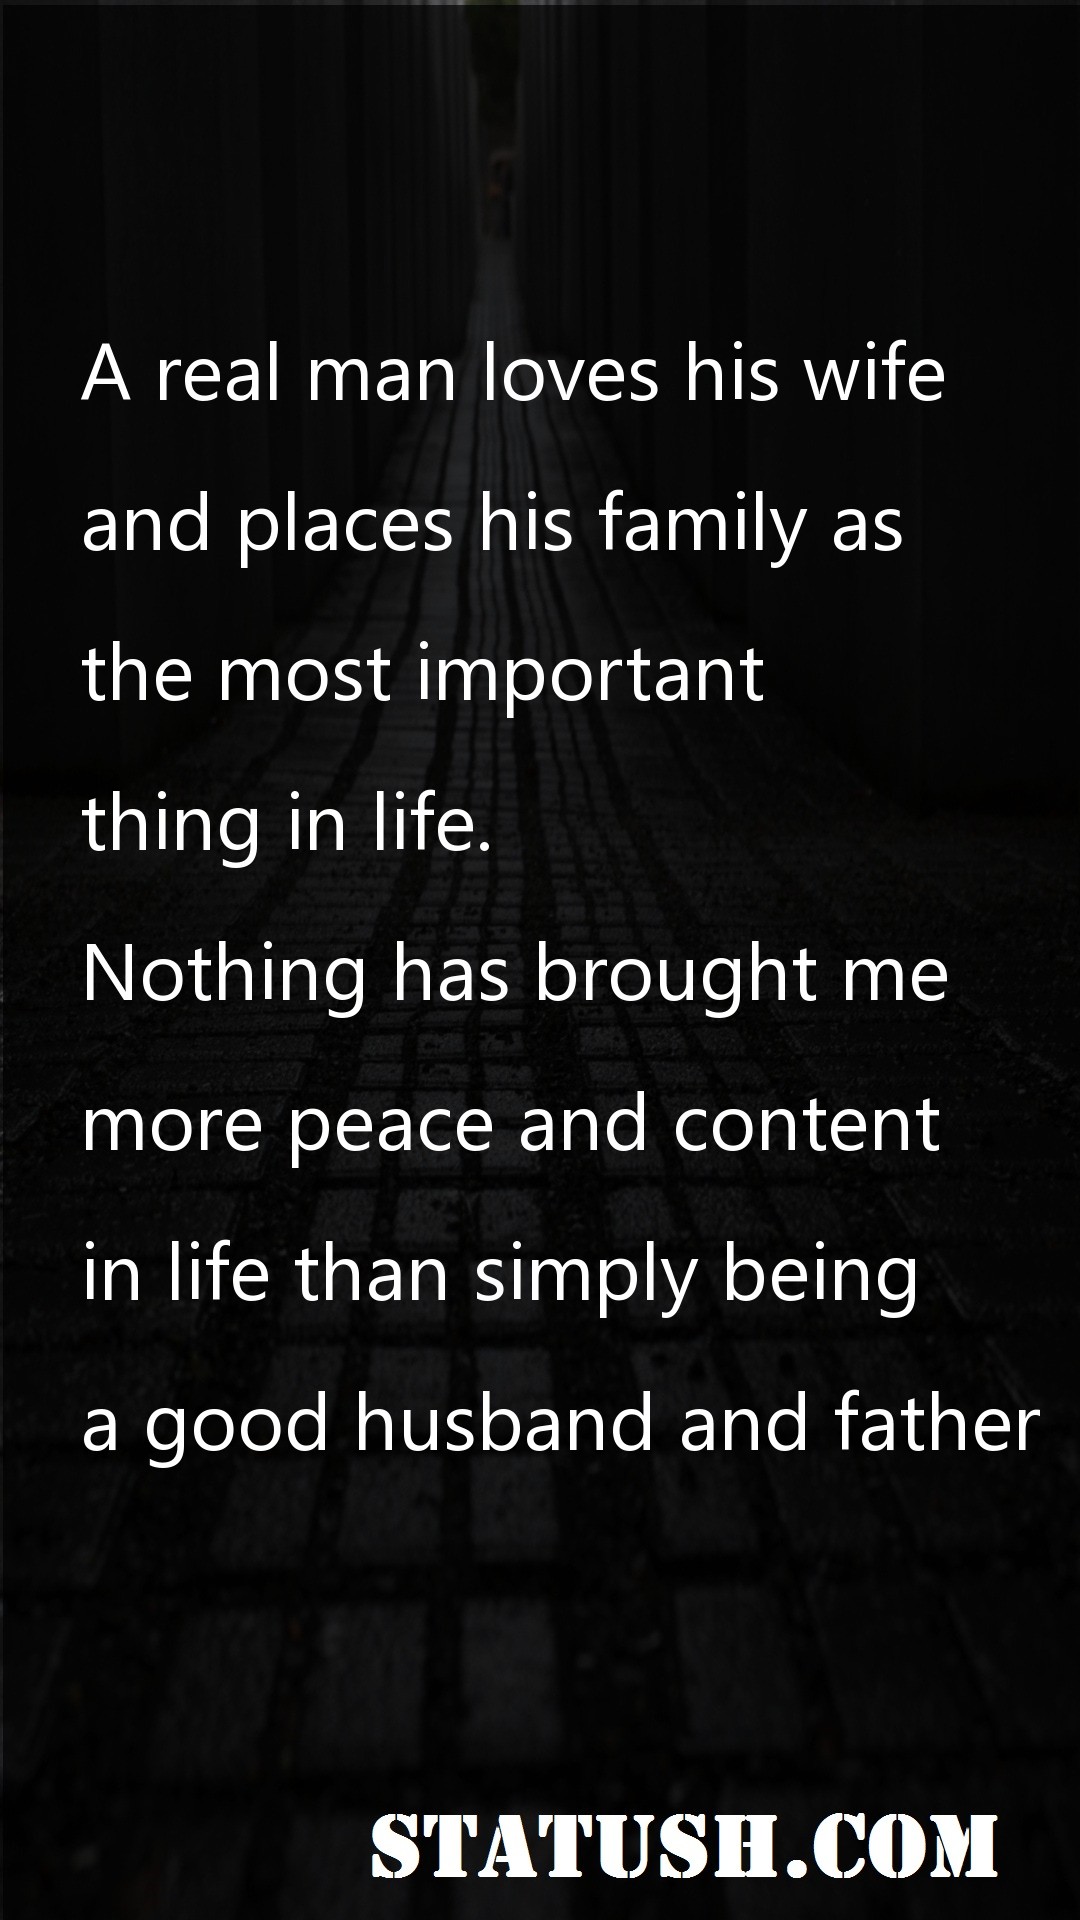 A real man loves his wife - Life Quotes at statush.com